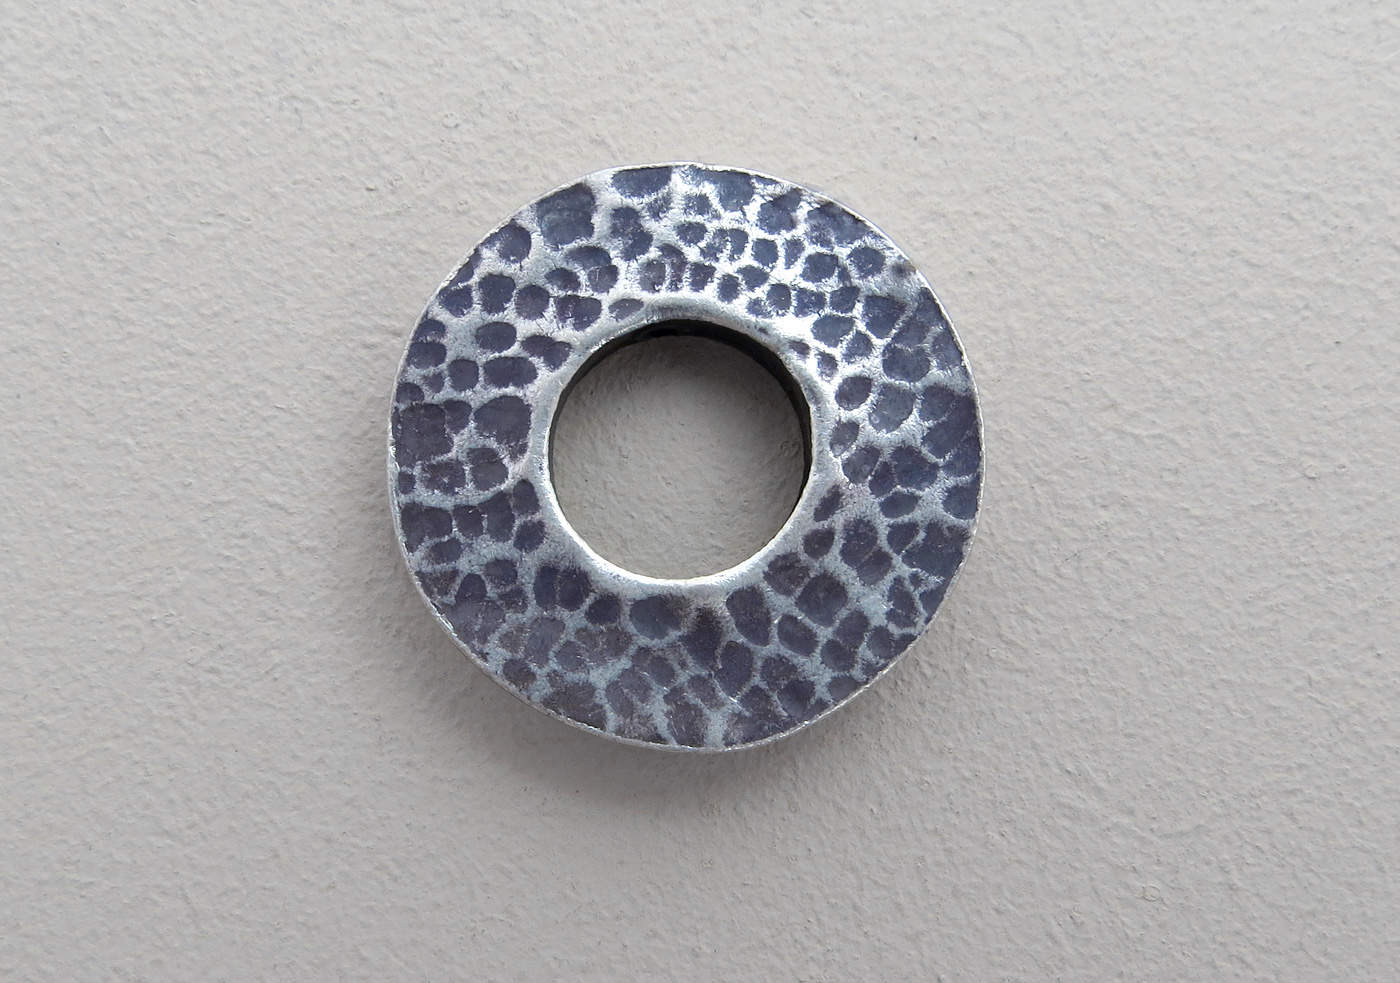 Fine Silver 25mm Hammered Circle Bead Cage